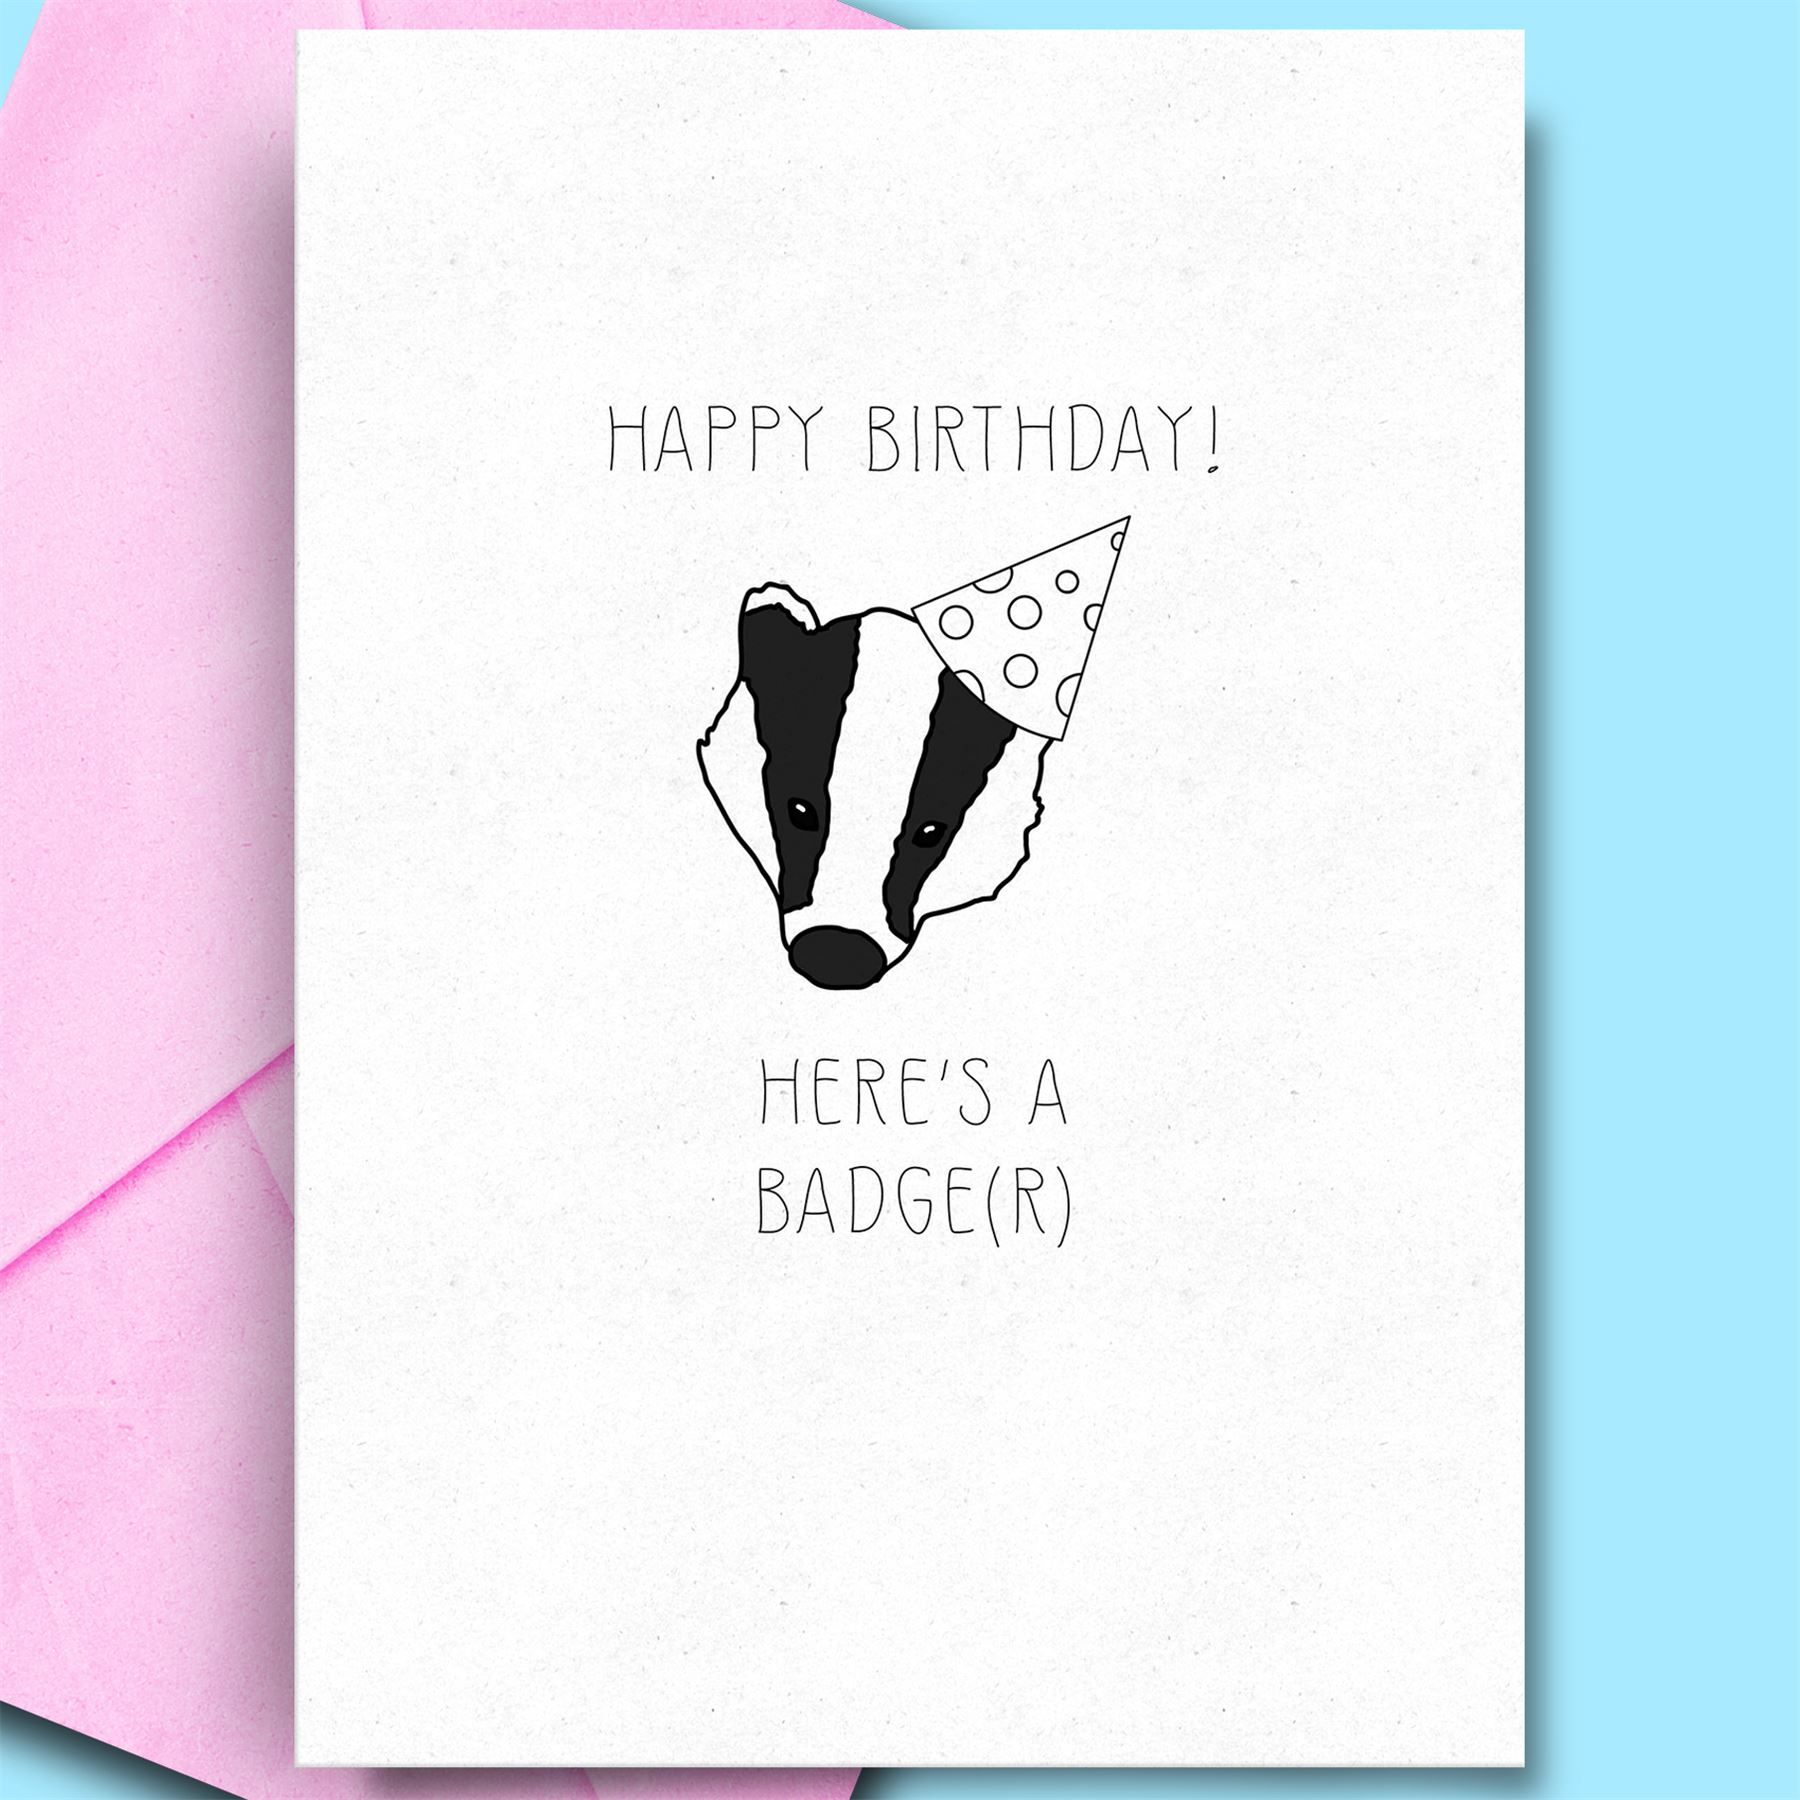 Ideas For Birthday Cards For Dad Cool Birthday Cards For Dad Daughter Mum Sister Fun Rude Comedy